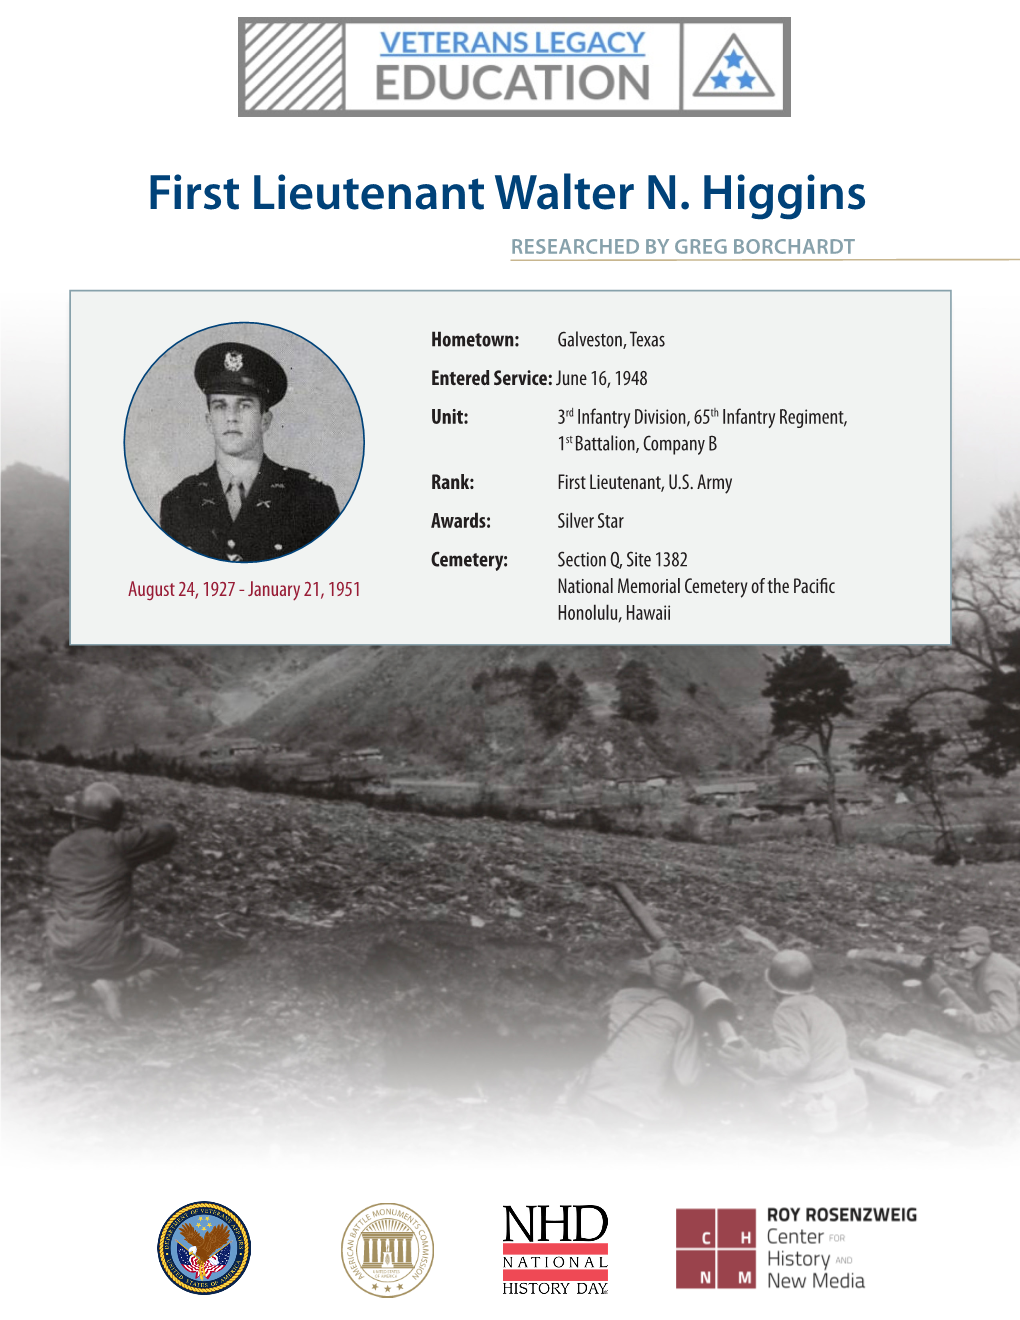 First Lieutenant Walter N. Higgins RESEARCHED by GREG BORCHARDT